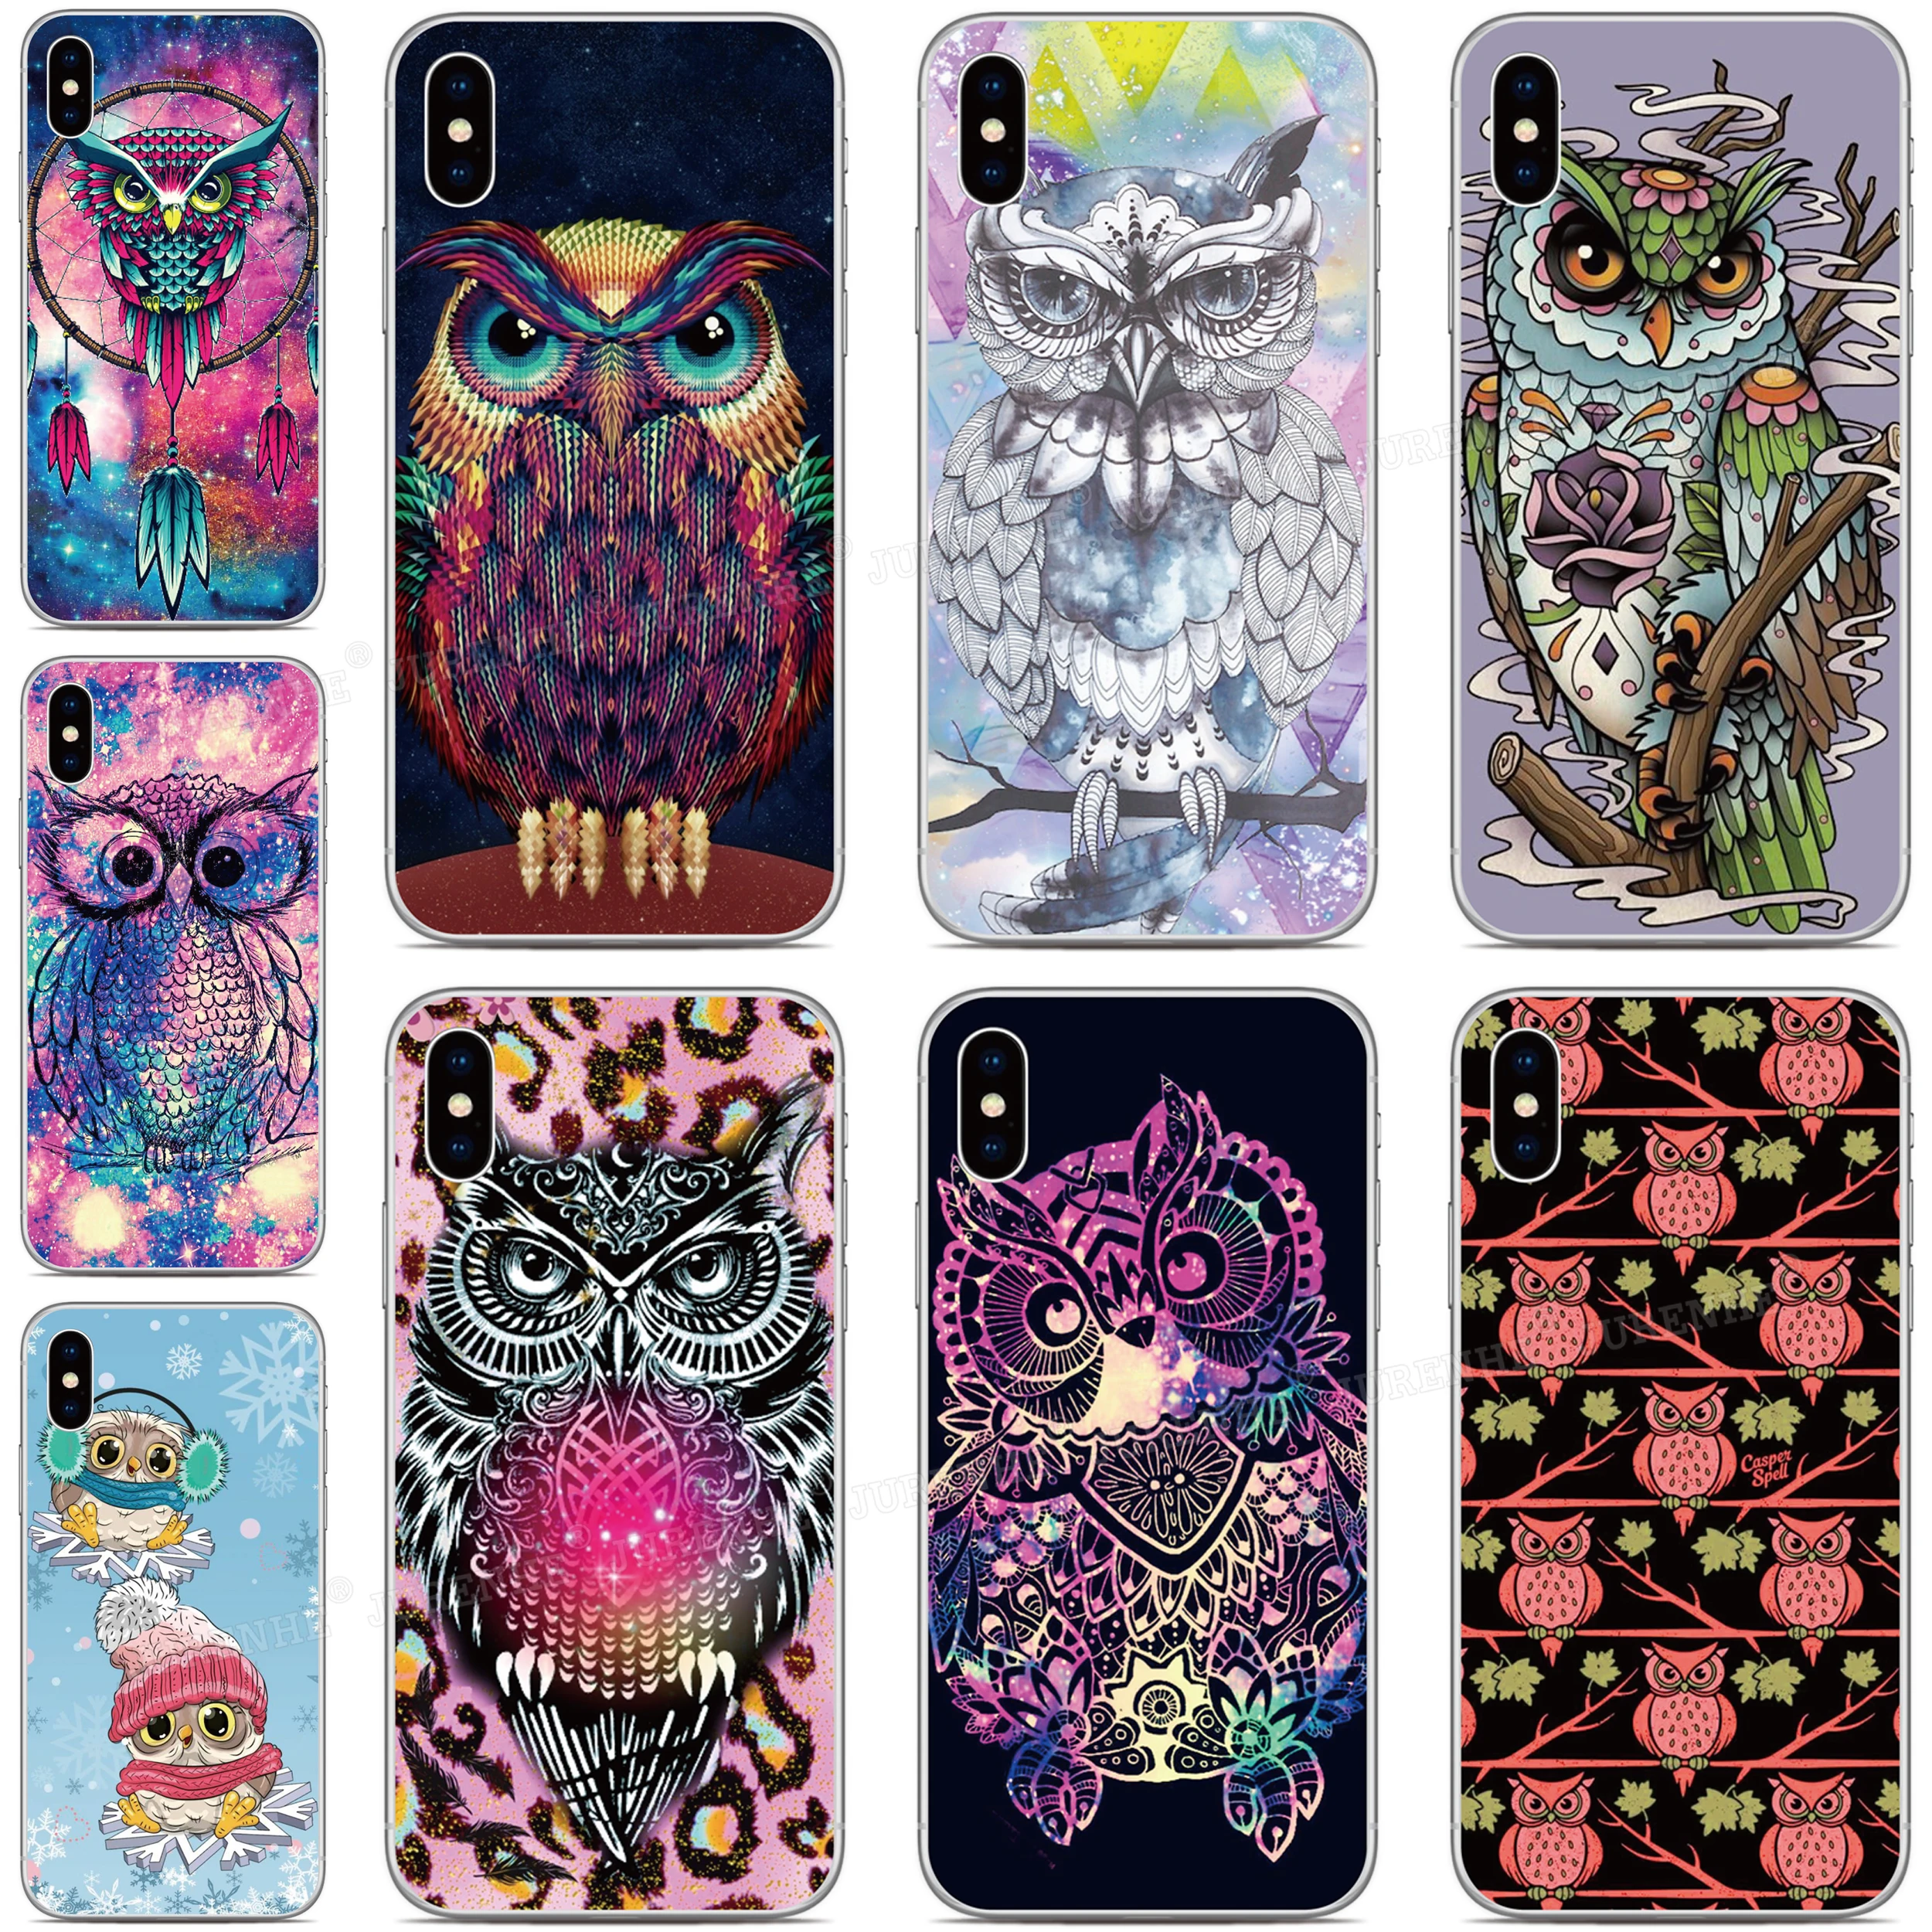 Fundas Funny Owl Phone Case For Google Pixel 5 5XL 4XL 2 3 4 4A 4G 5G 3A XL 2XL 3XL Lite TPU Soft Silicone Back Protective Cover